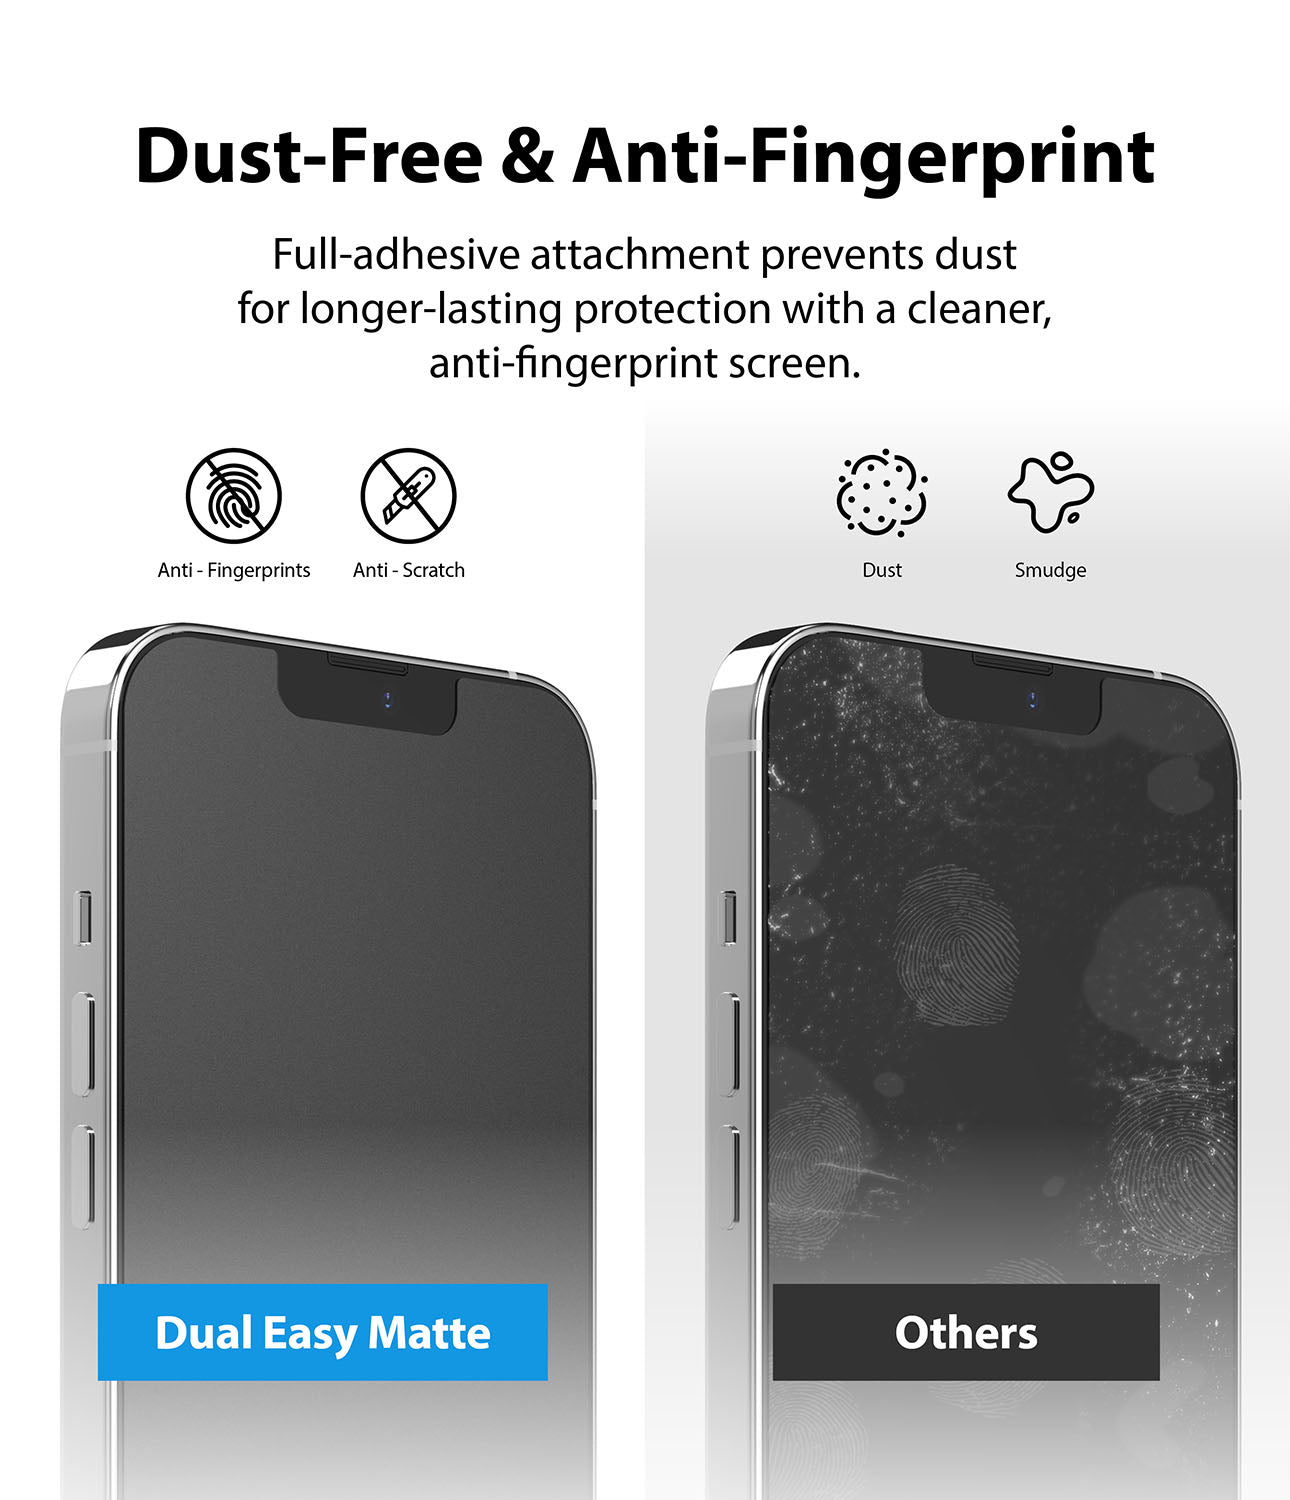 iPhone 13 Mini Screen Protector | Dual Easy Film Matte - Dust-Free & Anti-Fingerprint. Full-adhesive attachment prevents dust for longer-lasting protection with a cleaner, anti-fingerprint screen.